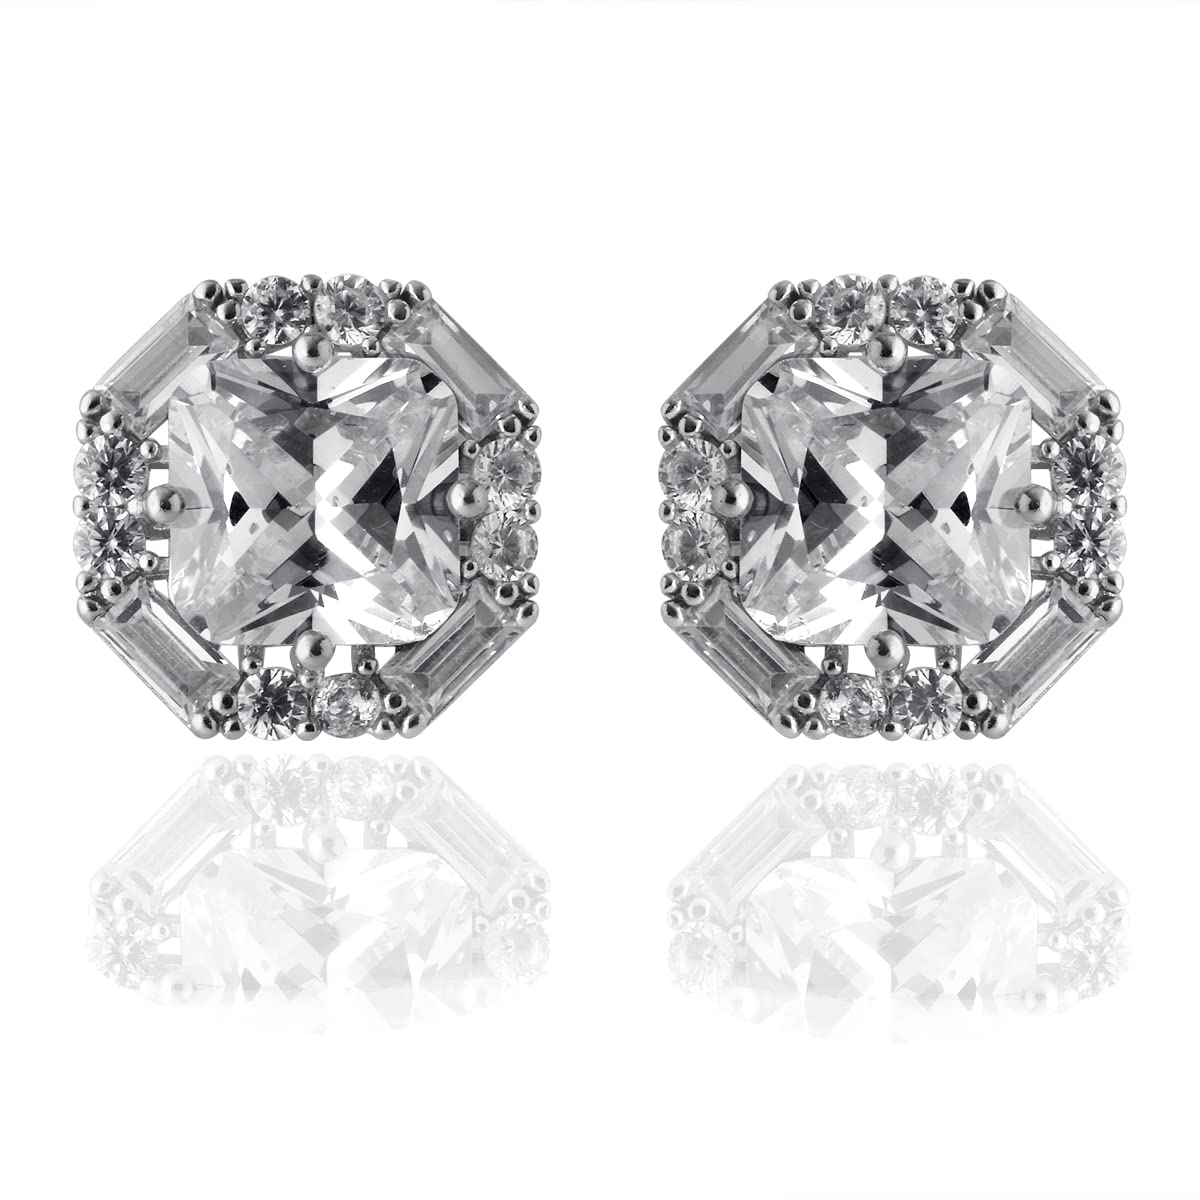 Diamond Studs Earrings For Every Day - Only Natural Diamonds Diamond Studs  Earrings For Every Day - Only Natural Diamonds